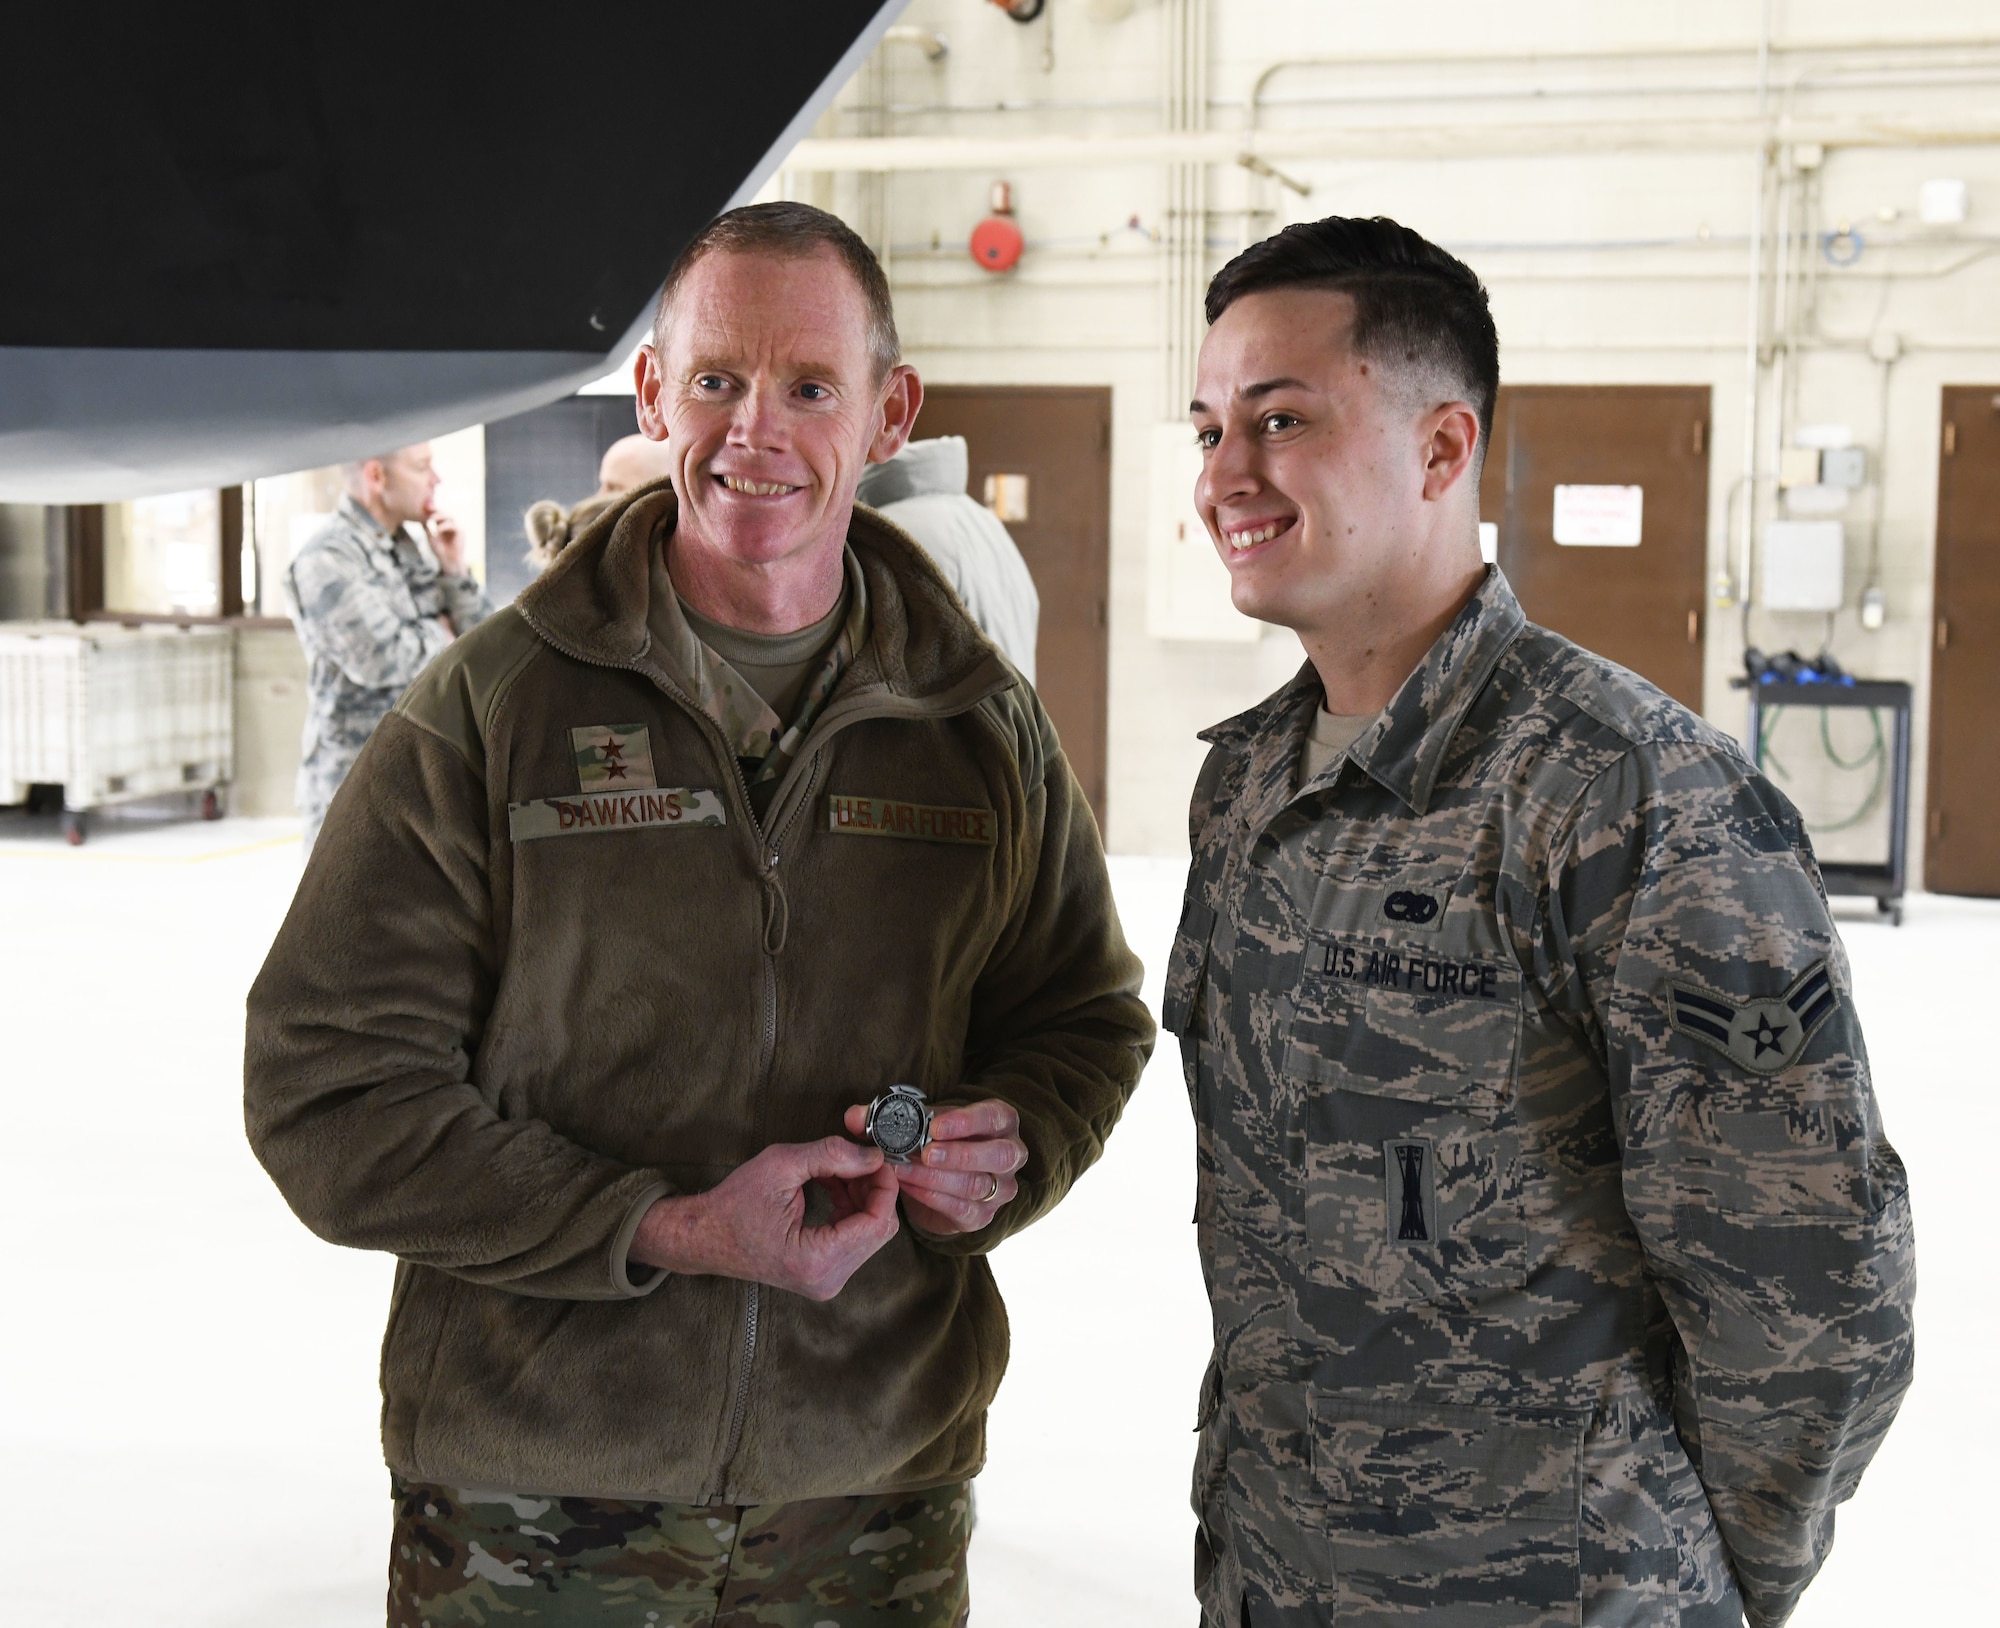 U.S. Air Force Maj. Gen. James Dawkins Jr., the 8th Air Force and J-GSOC commander, coins Airman 1st Class Kelsey Gray, a 28th Bomb Wing aircraft maintenance squadron weapons loader, while viewing a B-1B Lancer at Ellsworth Air Force Base, S.D., Nov. 13, 2018. Dawkins discussed the importance of taking care of people during his all call. (U.S. Air Force photo by Airman 1st Class Thomas I. Karol)